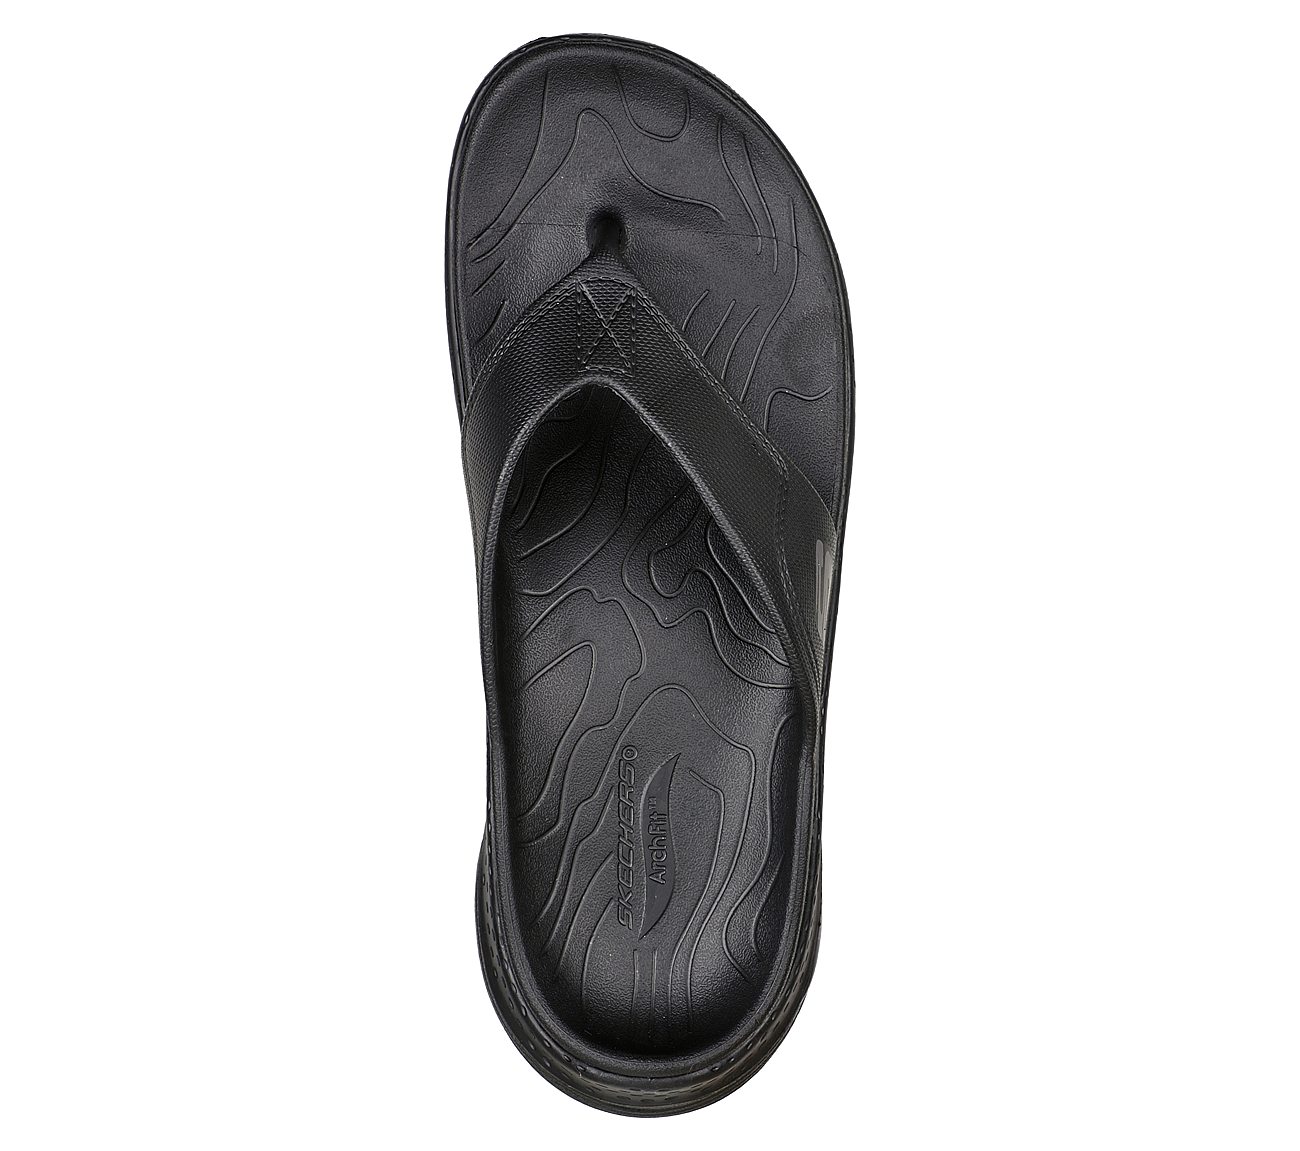 ARCH FIT, BBLACK Footwear Top View